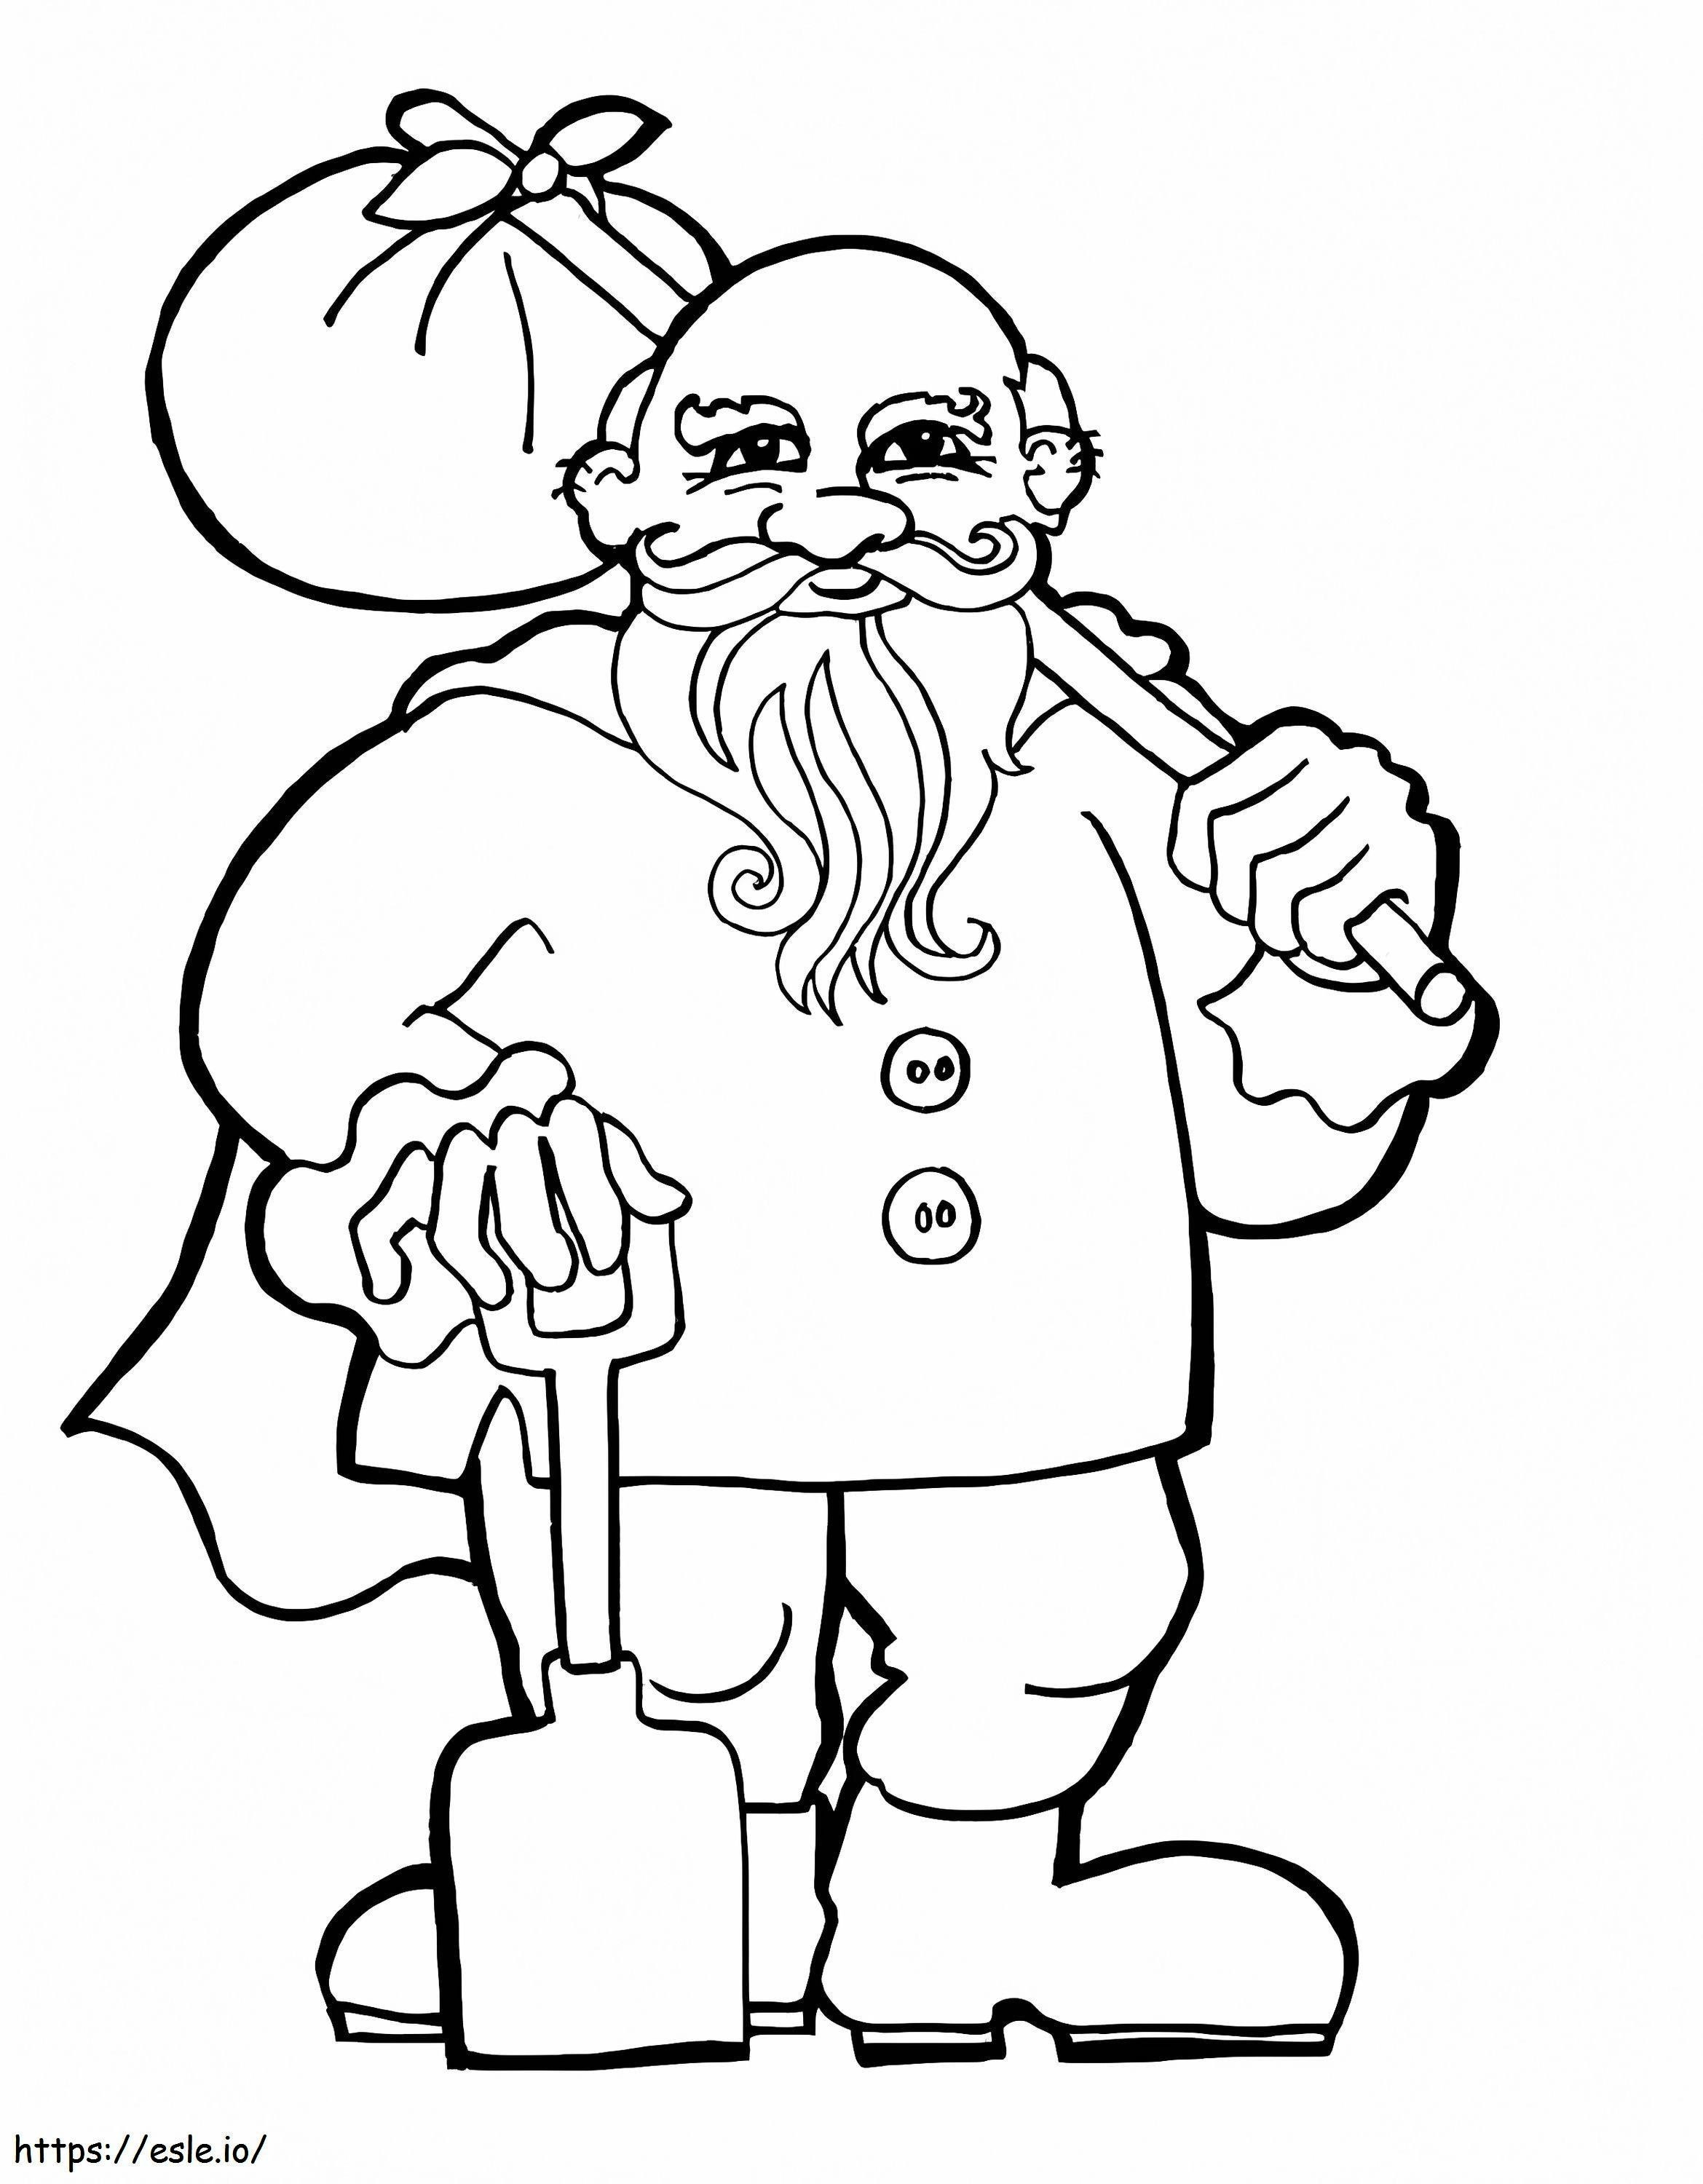 Old Dwarf coloring page